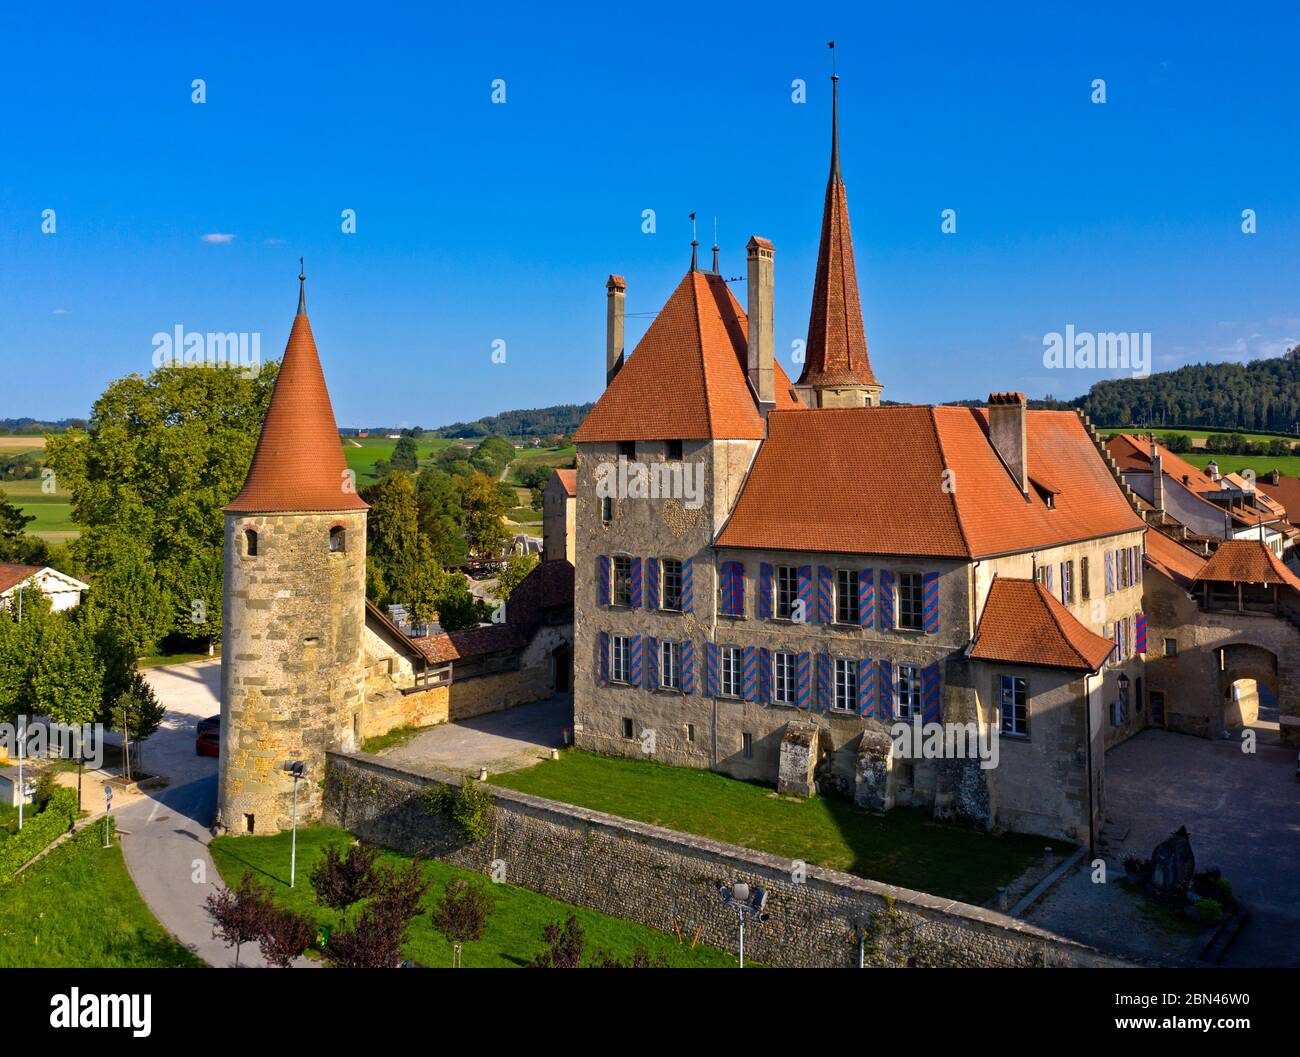 Avenches Castle, Chateau d’Avenches, Avenches, Canton of Vaud, Switzerland Stock Photo